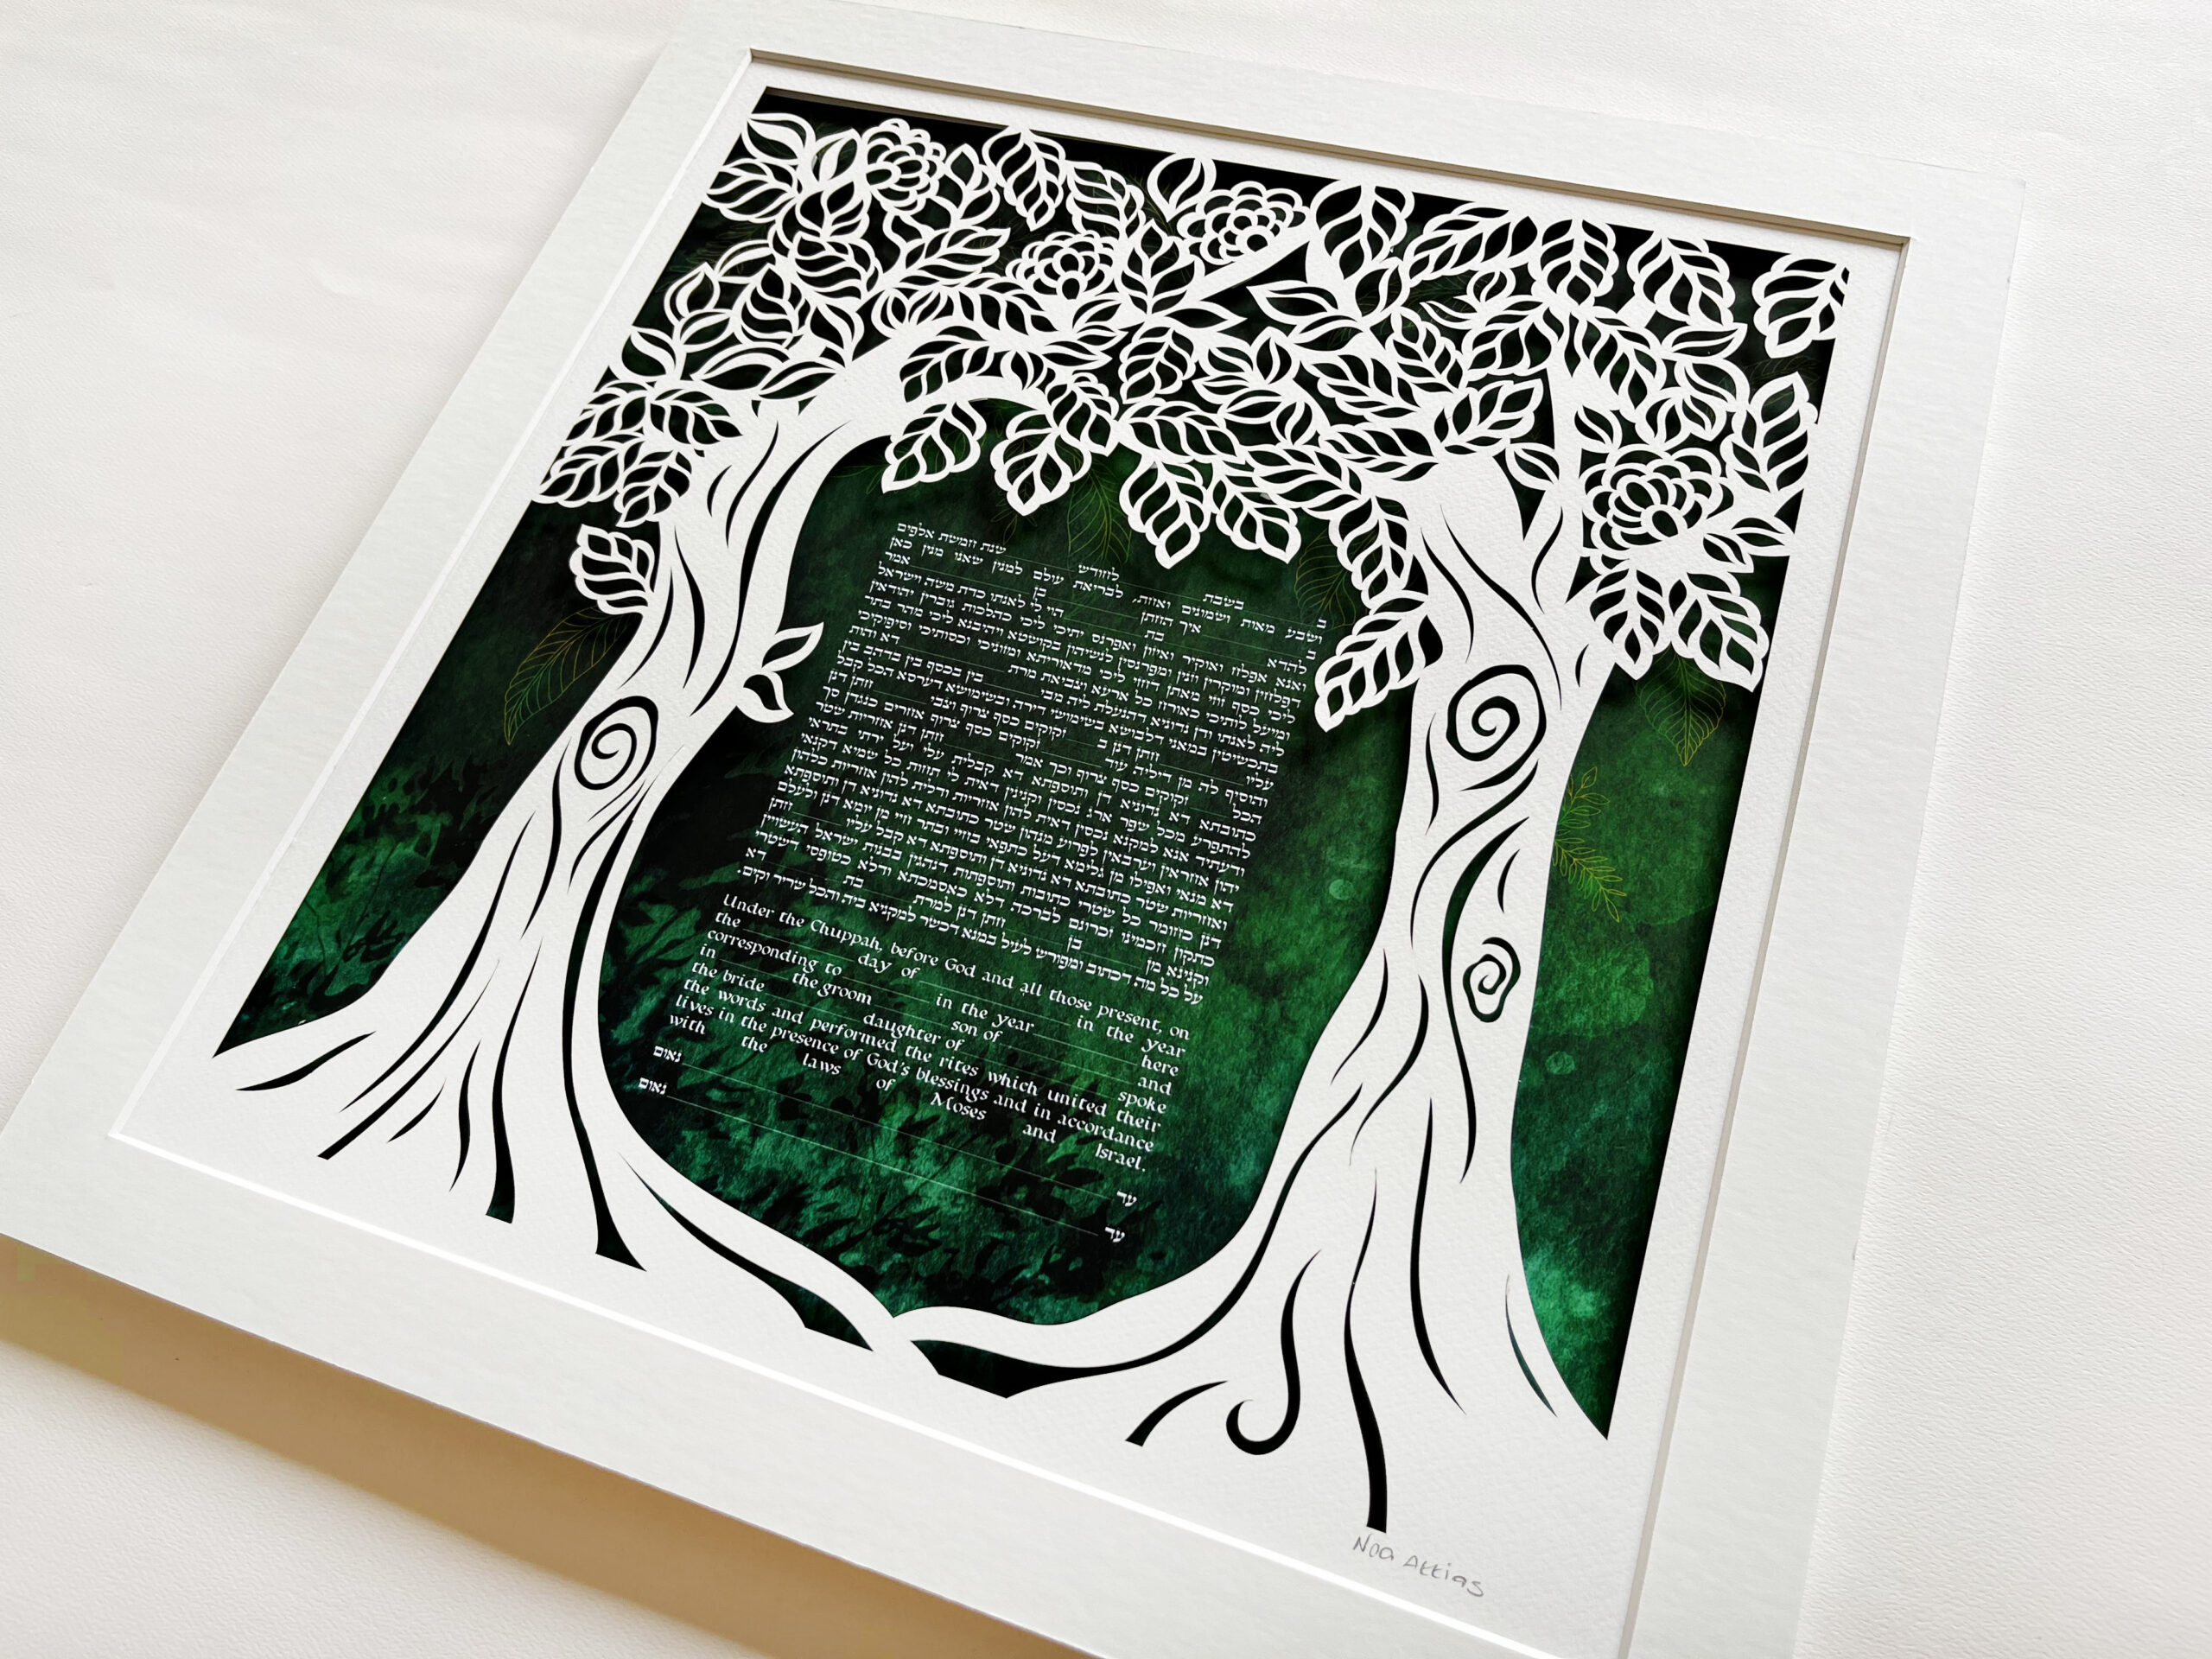 7. A montage of different personalized papercut gifts, showcasing the endless possibilities.